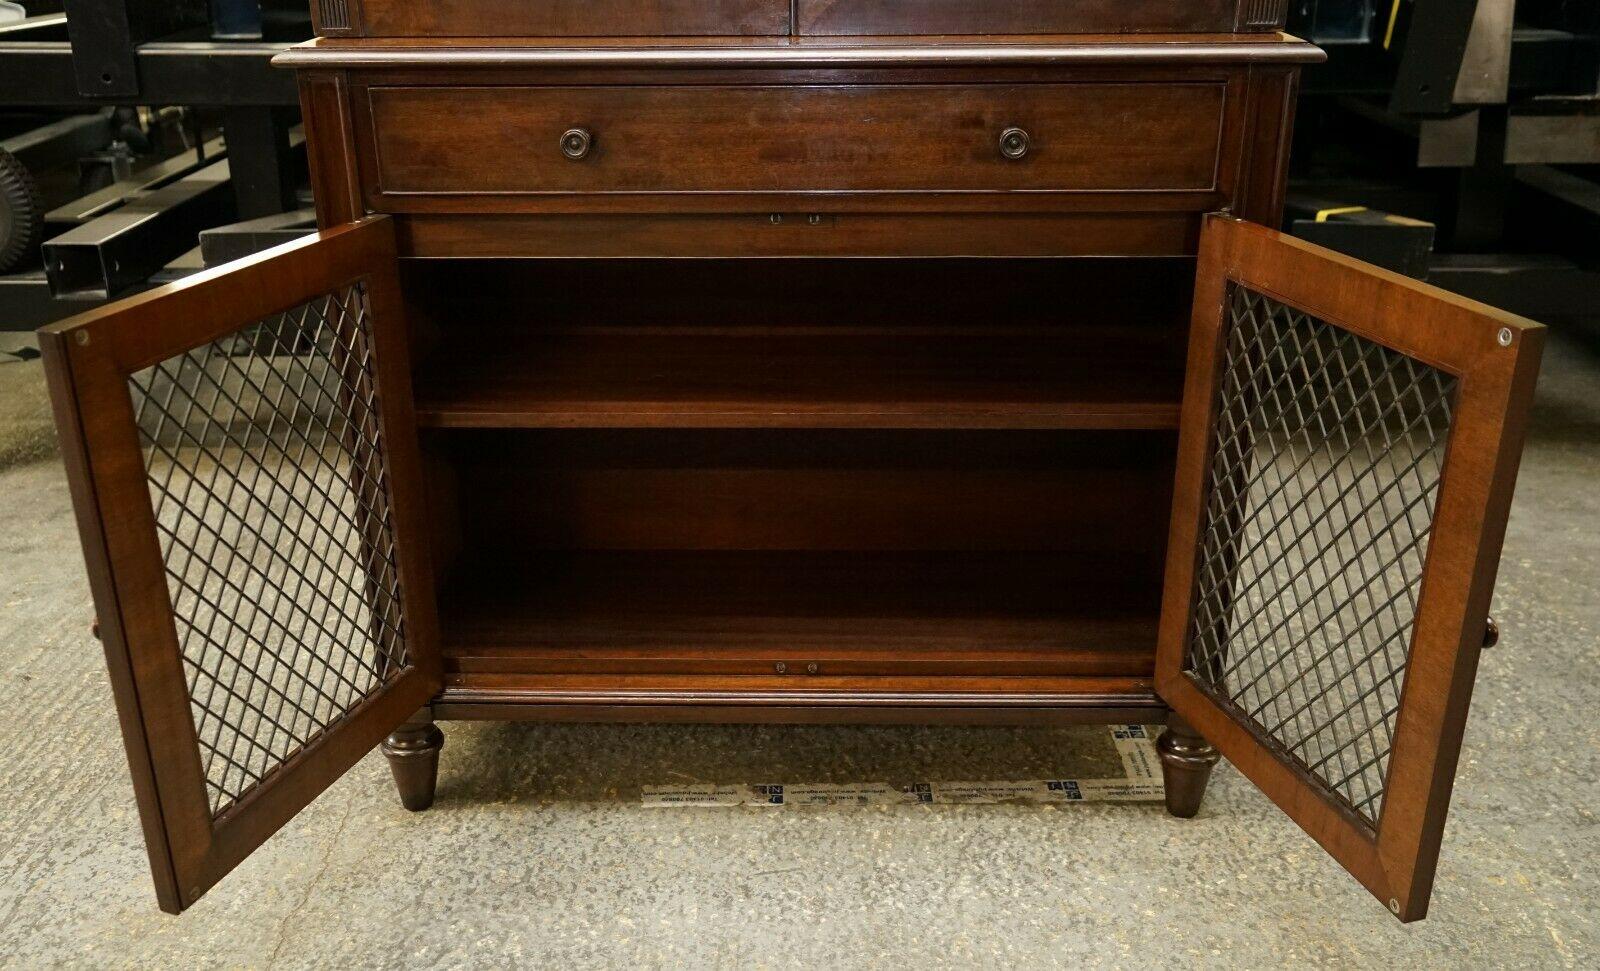 20th Century Gorgeous Vintage Style Dresser with Lovely Metal Mesh Decoration on Bottom Doors